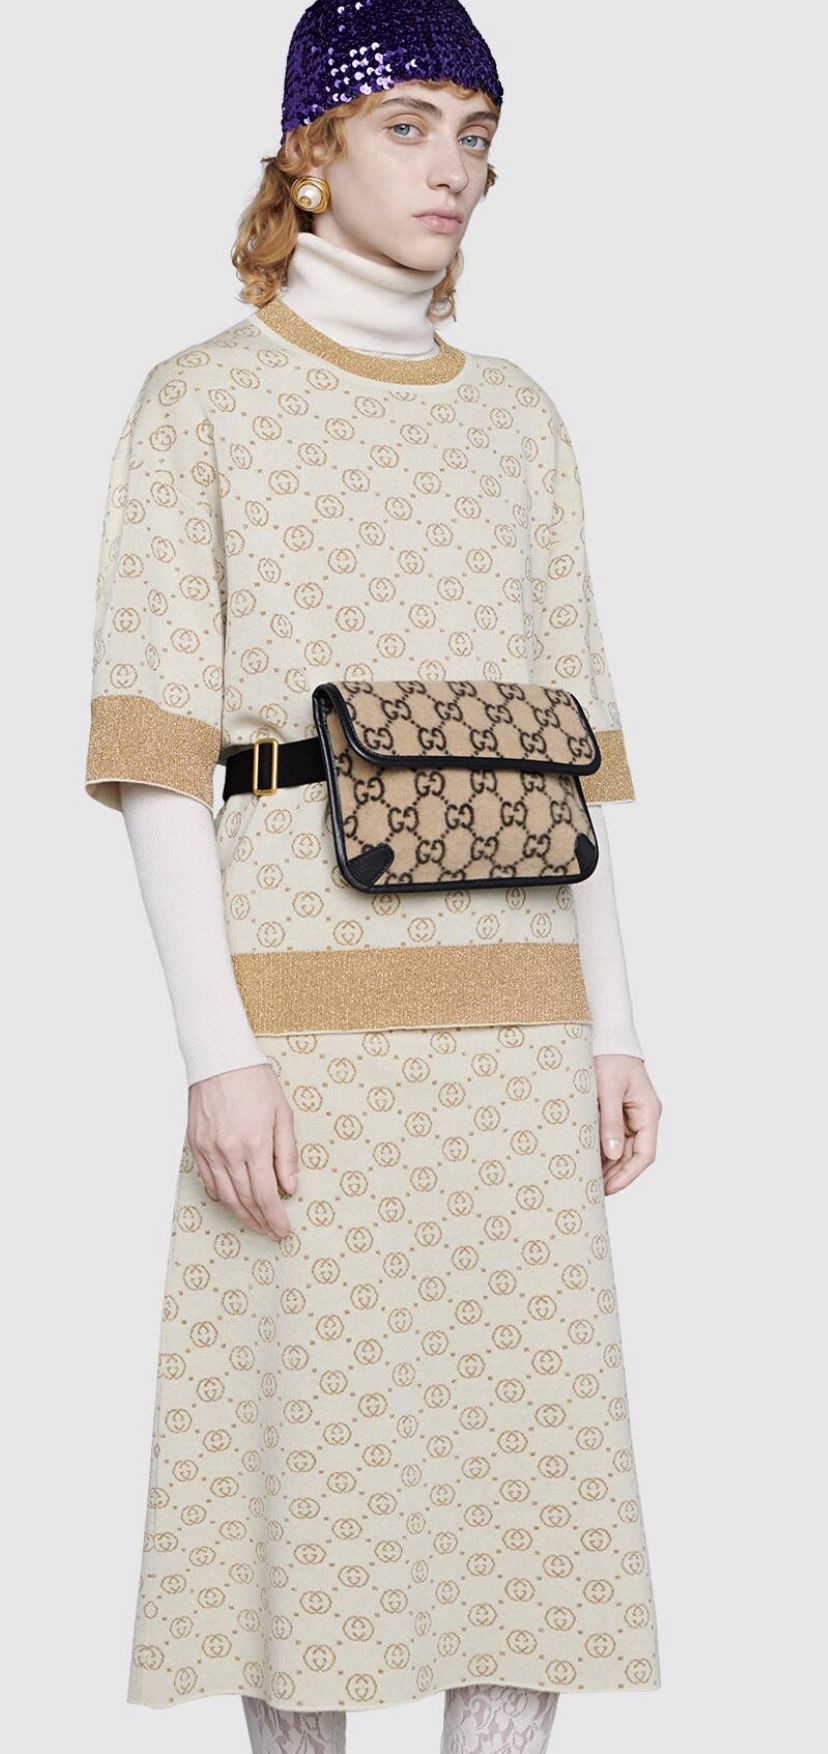 Gucci Wool Belt Bag Cream/Black sold out!